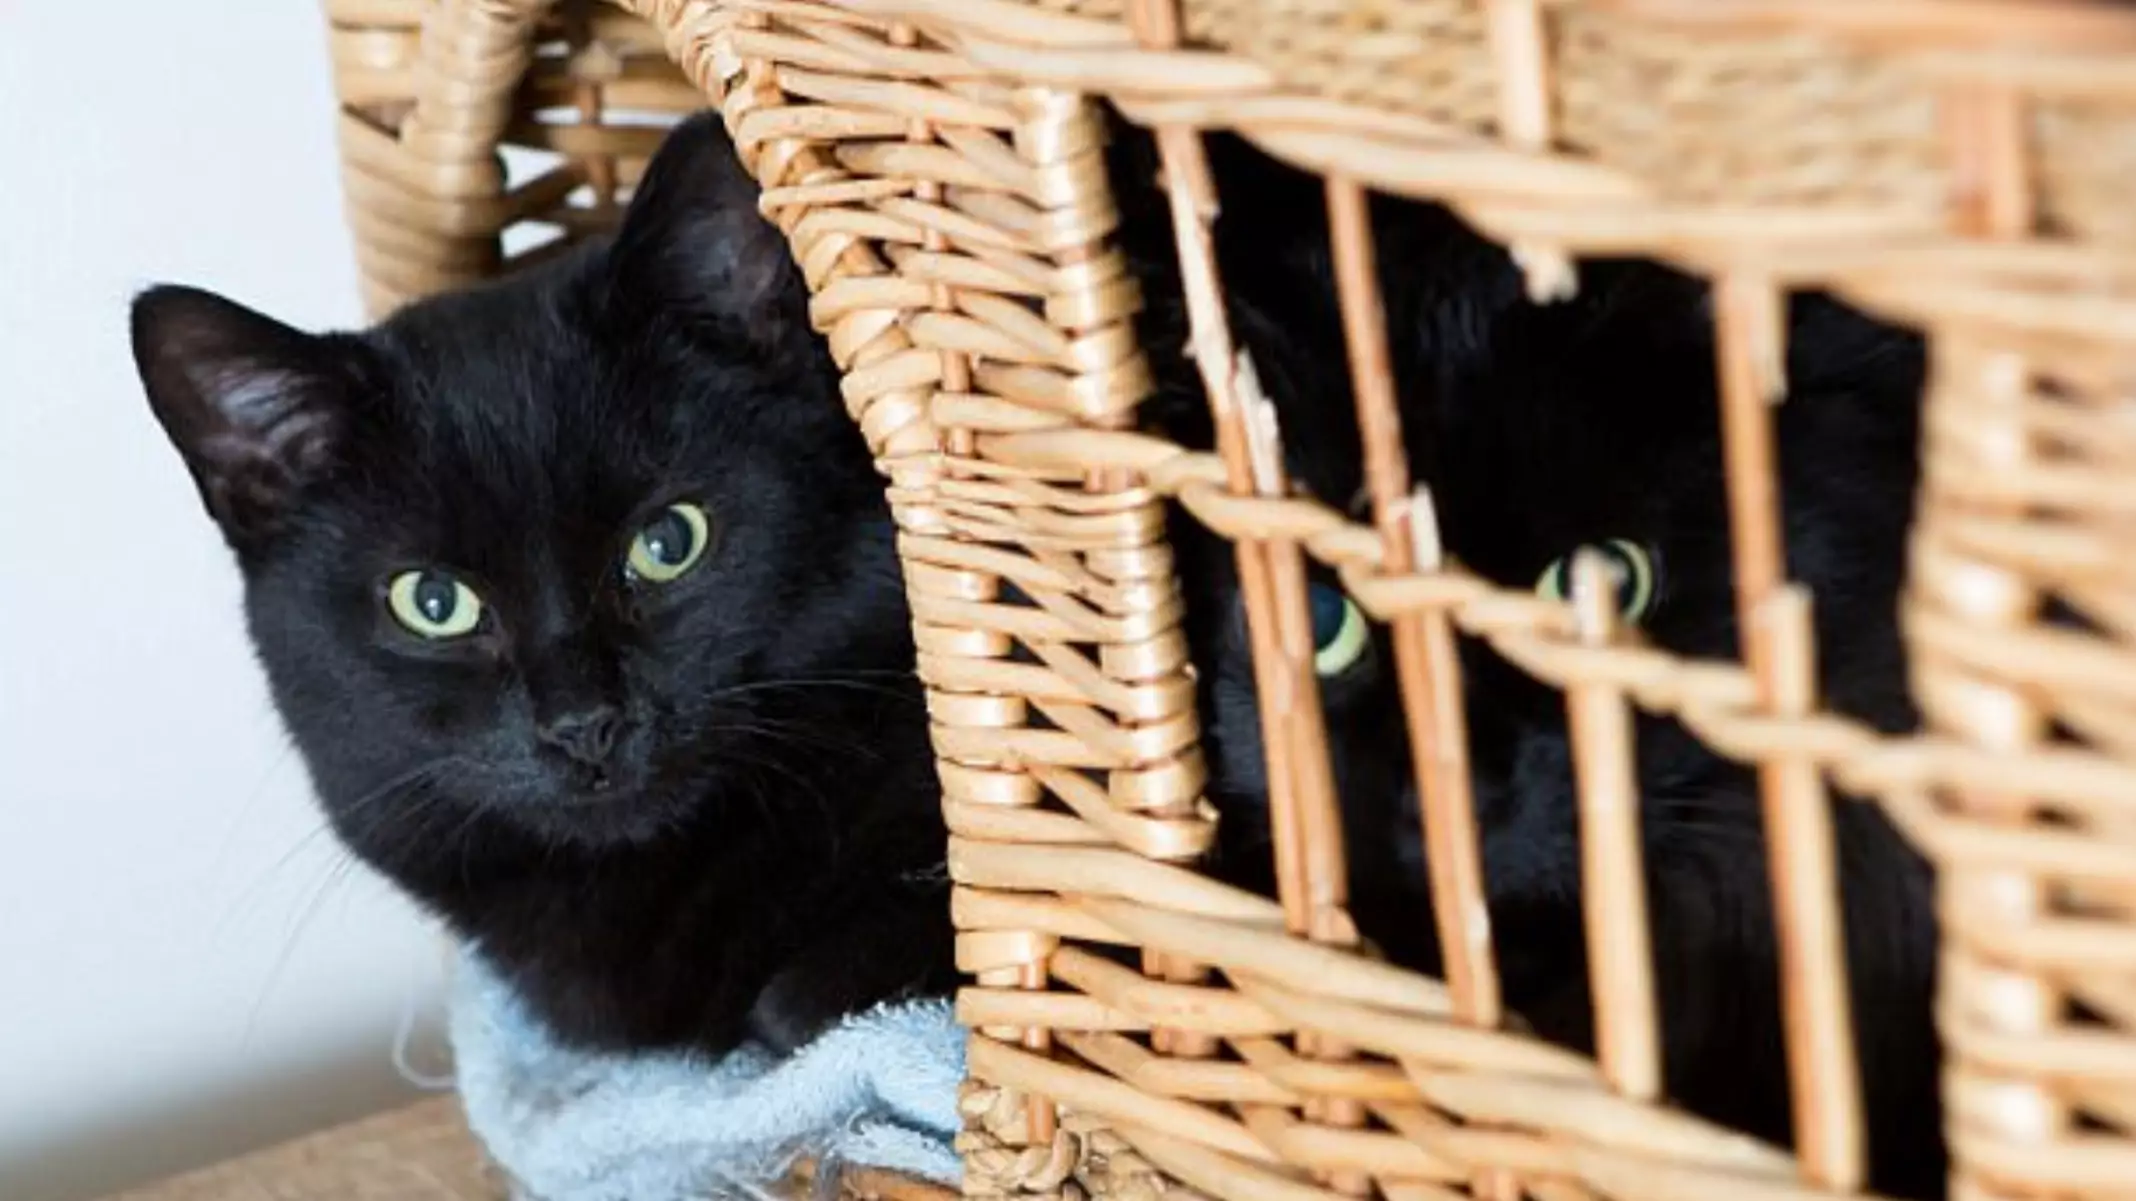 Black Cats Can't Be Rehomed Because 'They Don't Show Up In Selfies'